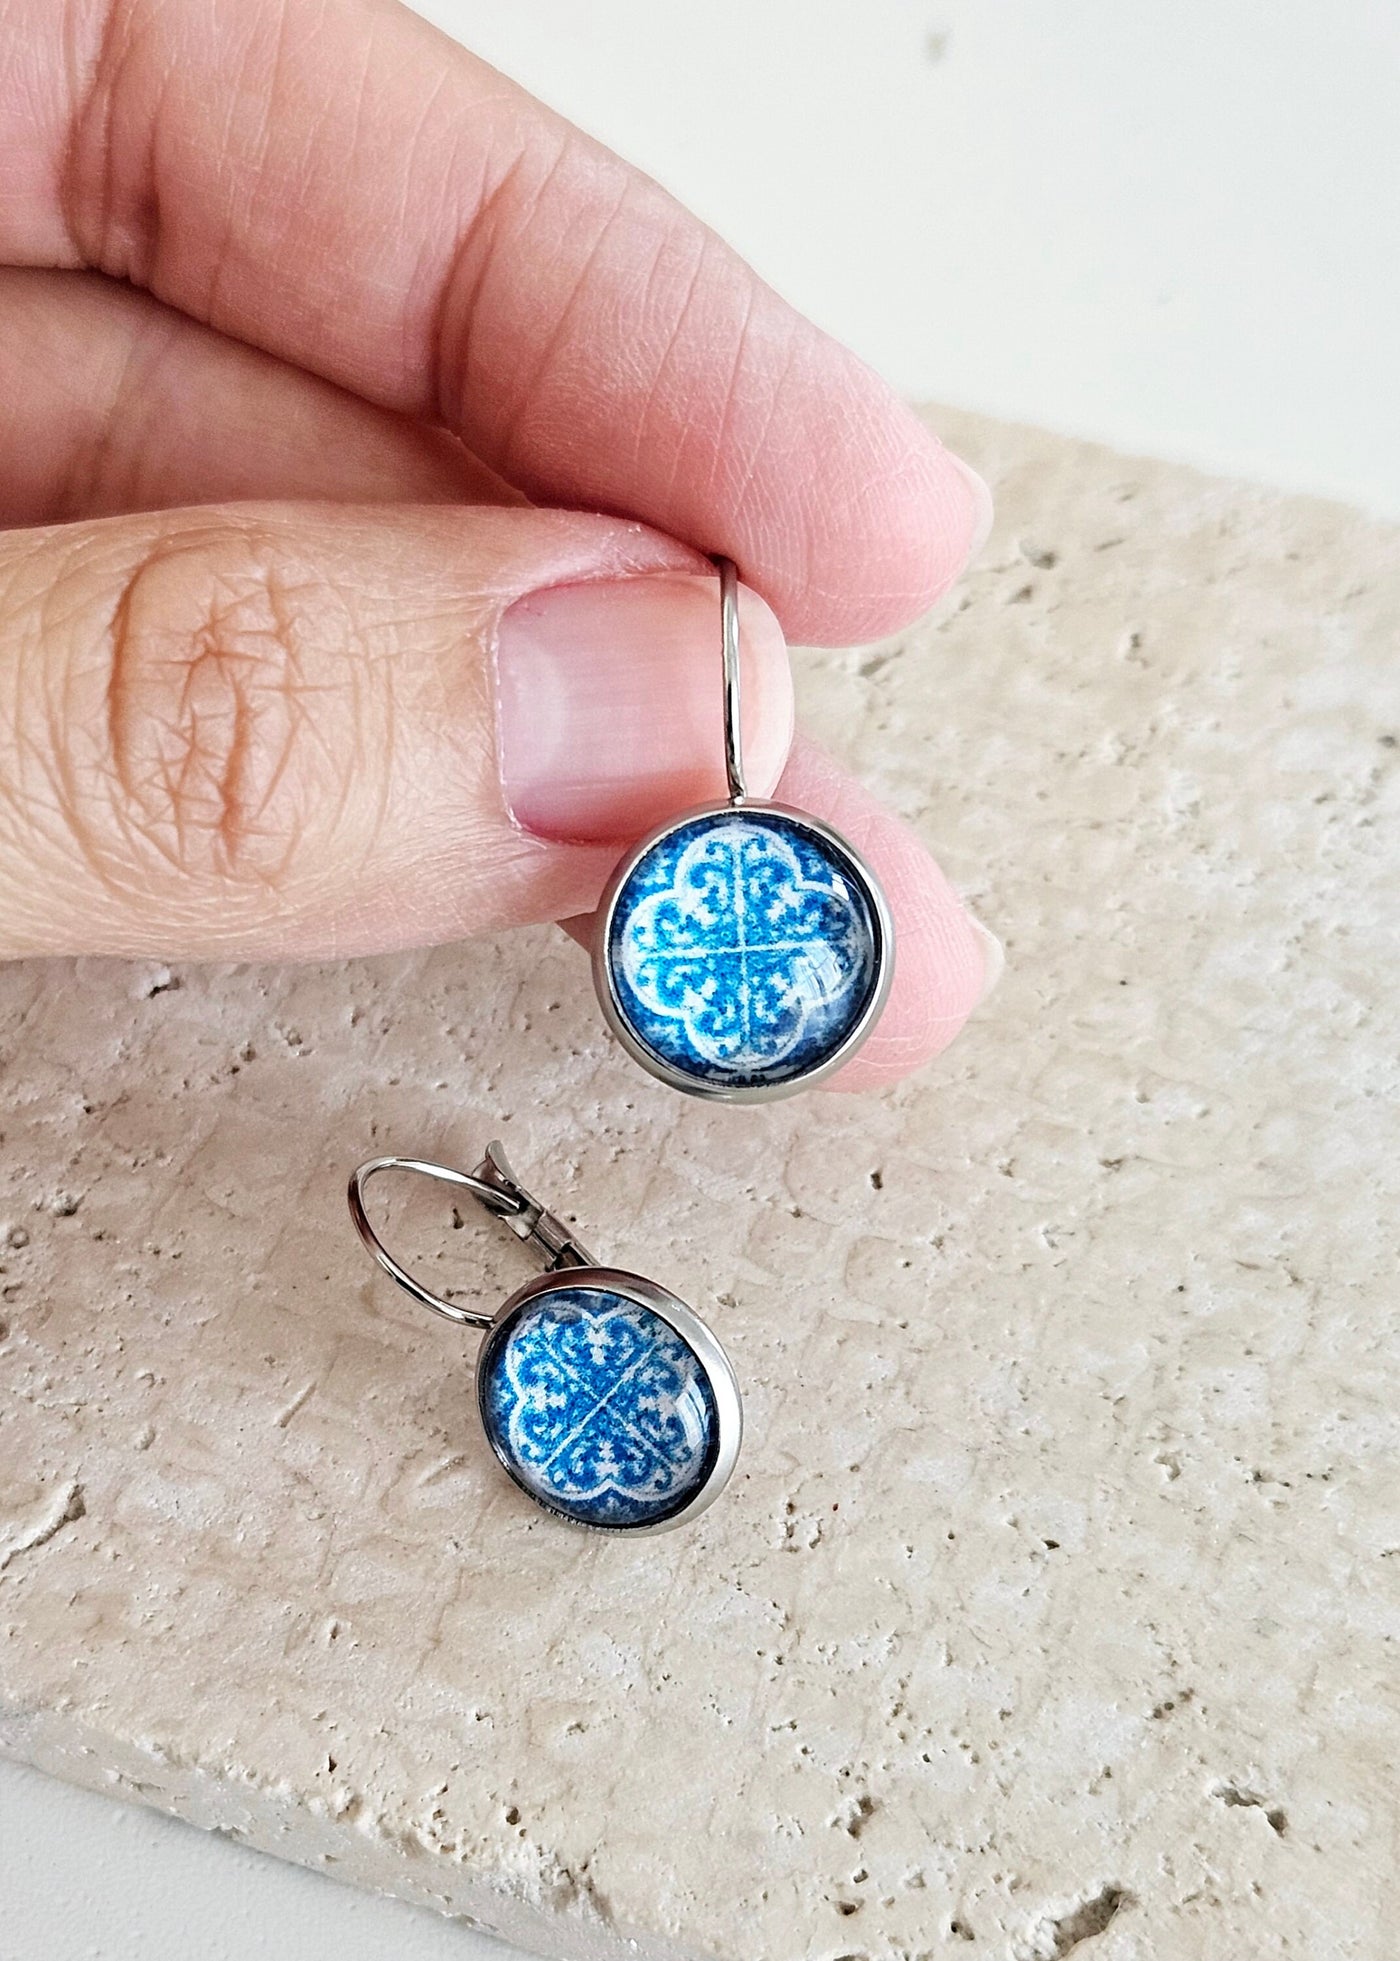 Portugal Blue Tile Earring Azulejo Jewelry Classical Antique Tile Earring Geometric Round Earring Gift from Portugal Travel Vacation Gift